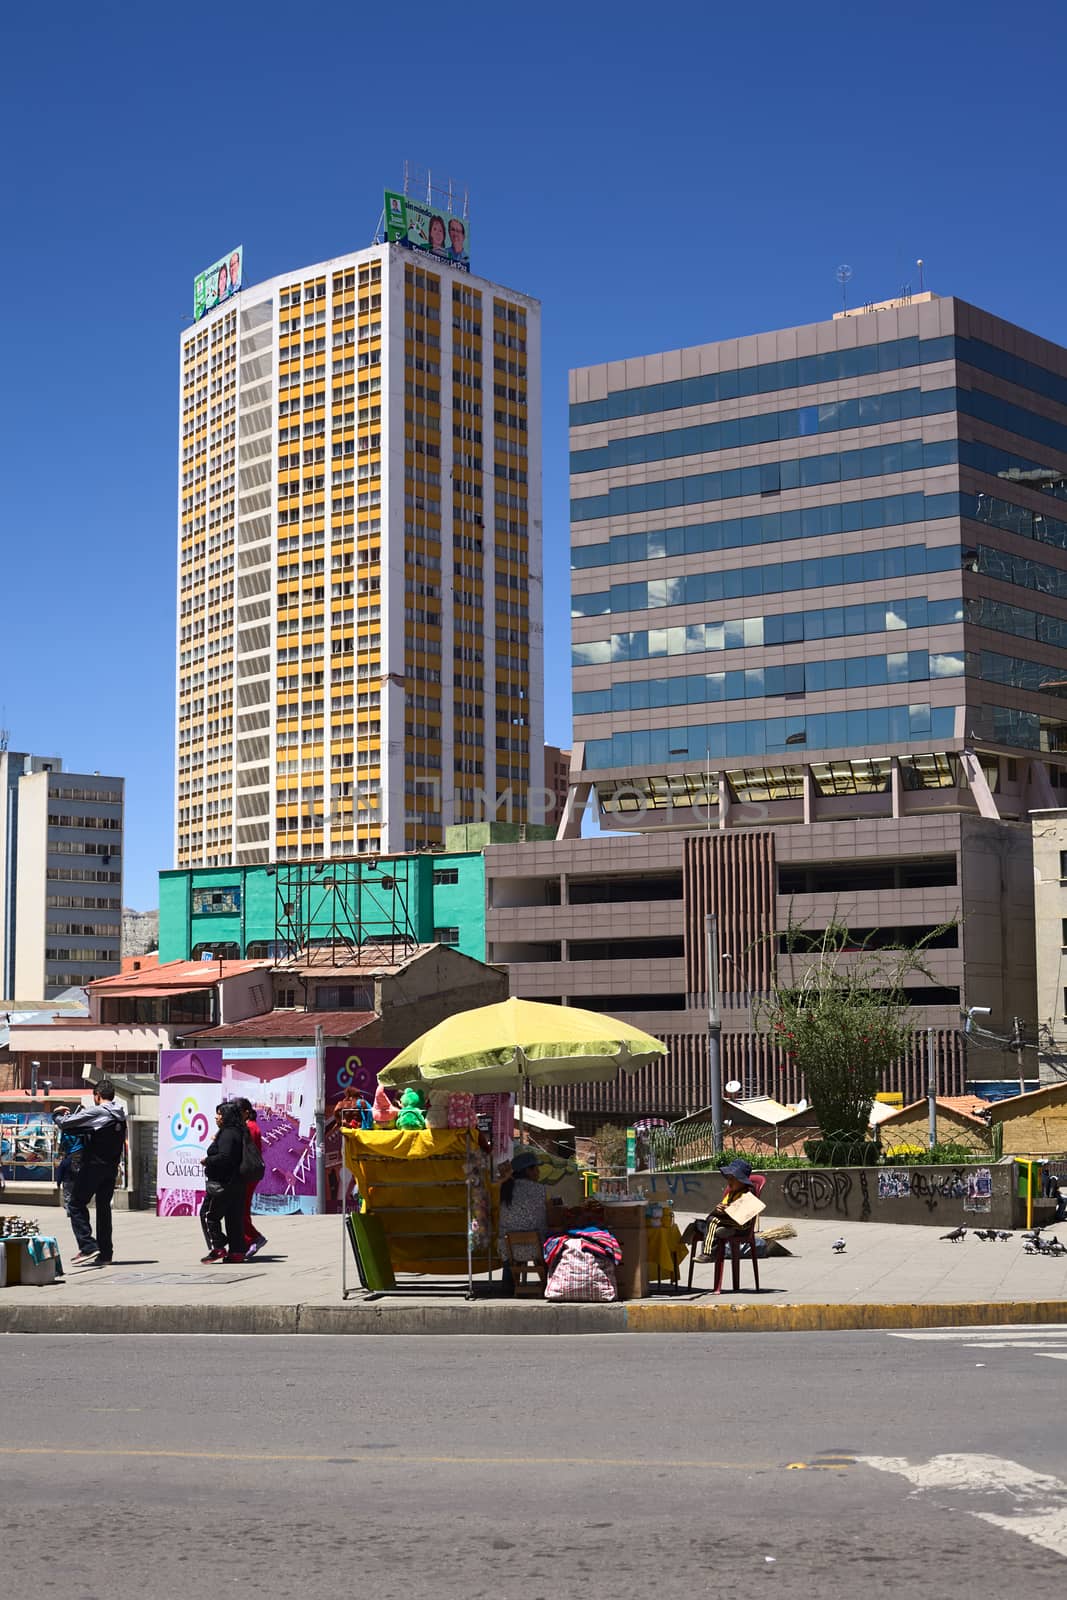 LA PAZ, BOLIVIA - OCTOBER 12, 2014: Unidentified street vender along the Camacho avenue with tall modern buildings in the back in the administrative capital on October 12, 2014 in La Paz, Bolivia 